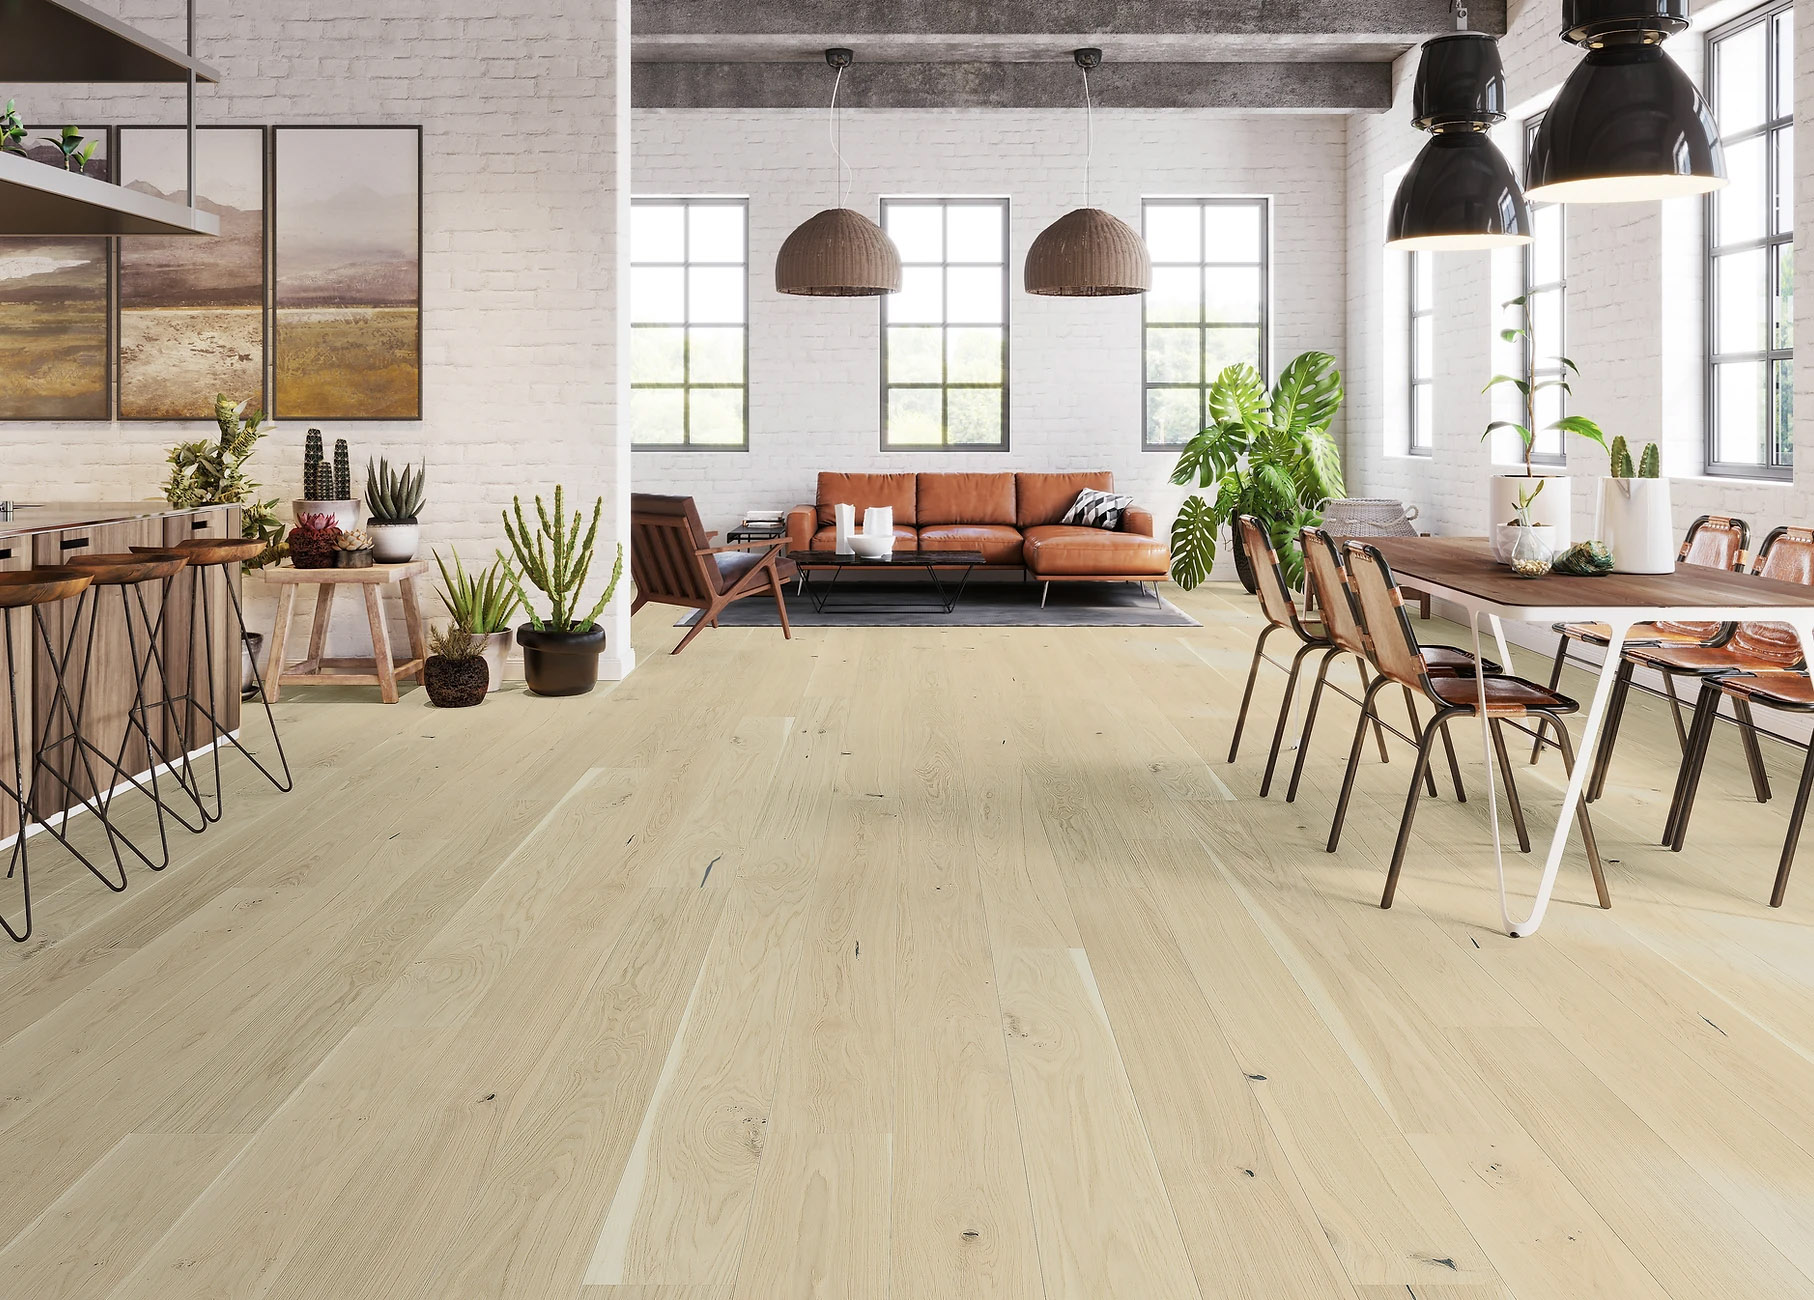 Muller Graff is German flooring manufacturer that started 150 years ago. They are a company with a great reputation for precision and product innovation.